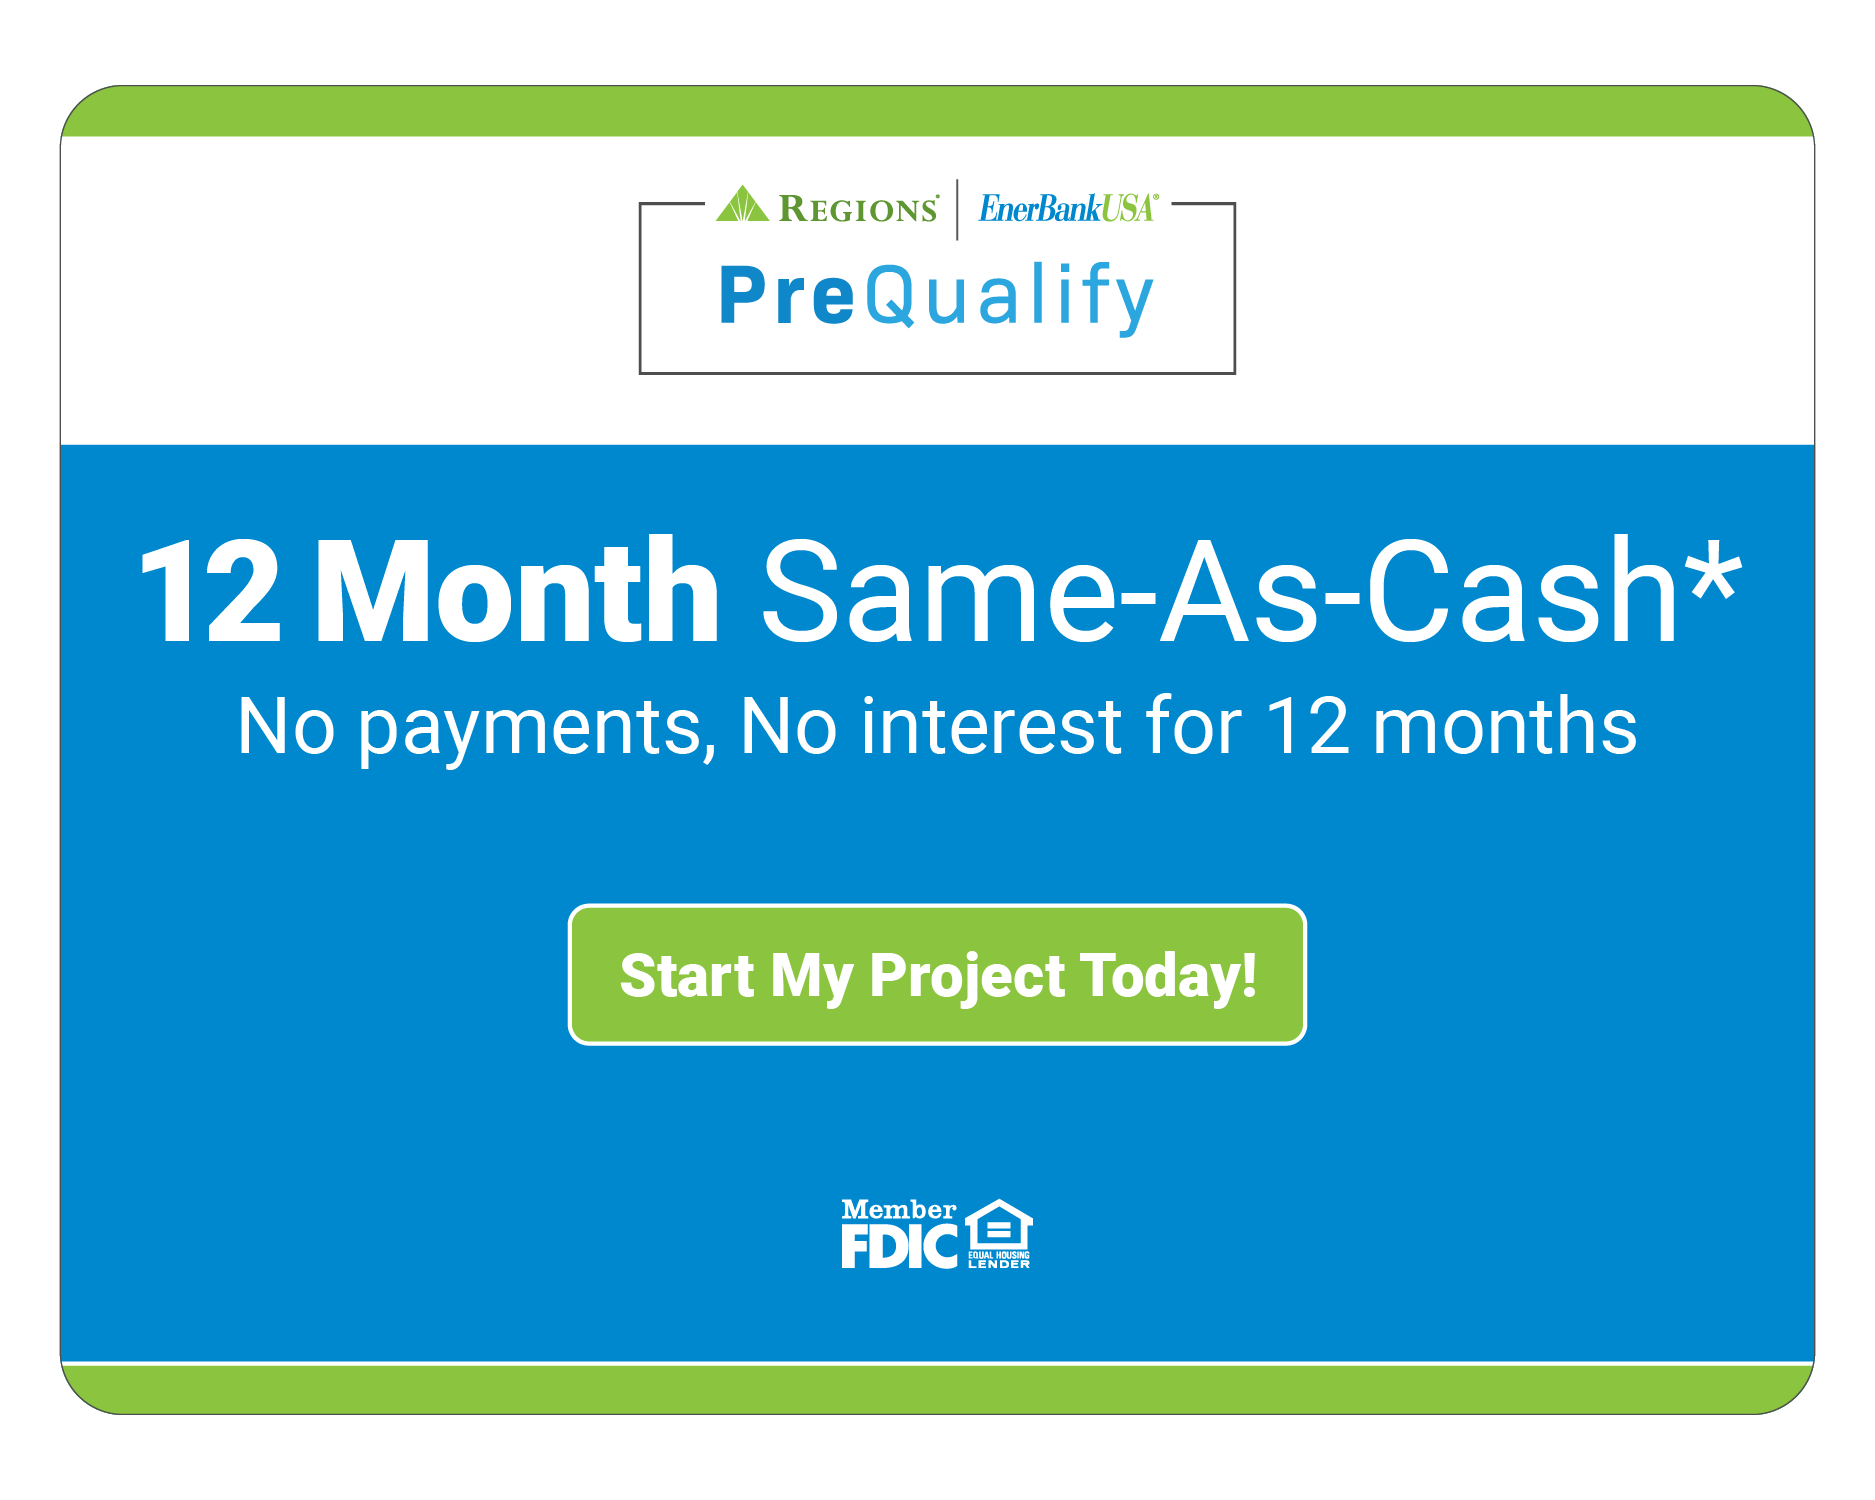 PreQualify - 12 Month Same-As-Cash* No Payments, No Interest for 12 months